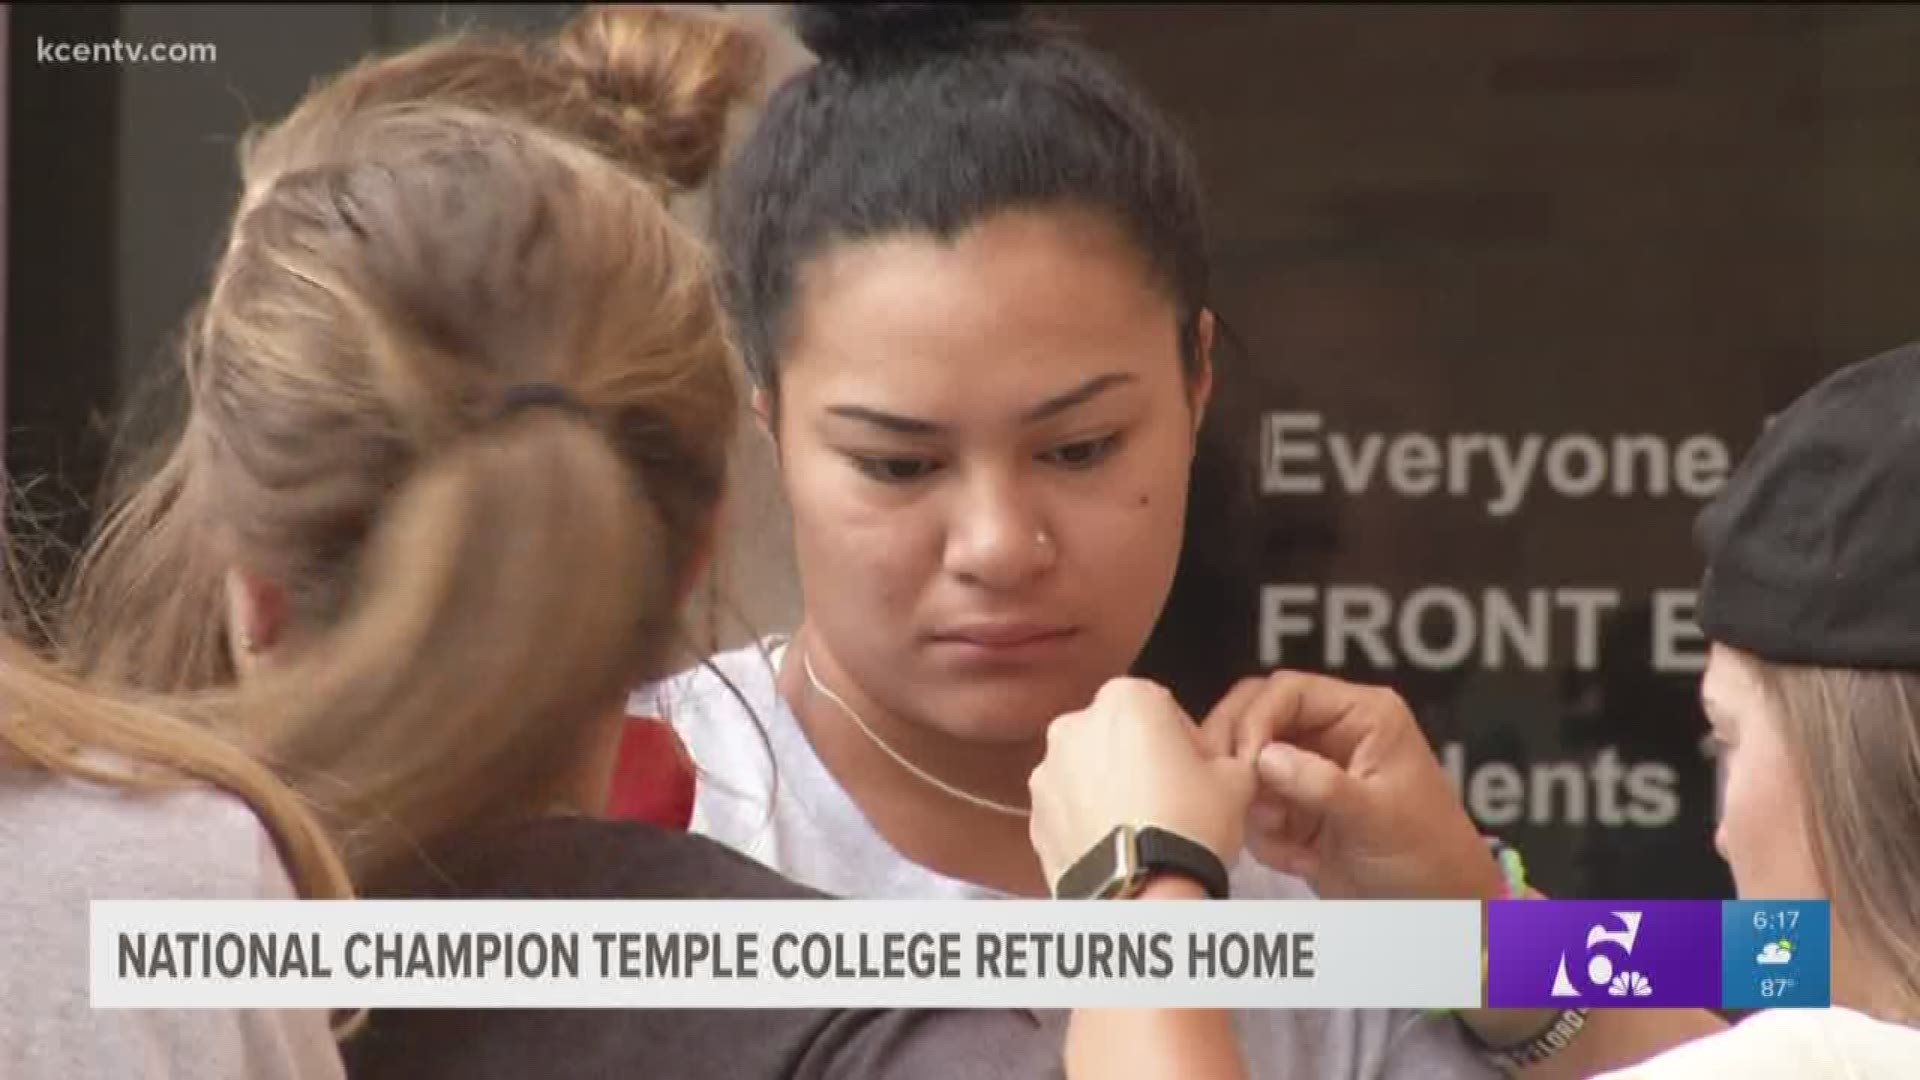 Saturday was no doubt the greatest day in Temple College softball history. 